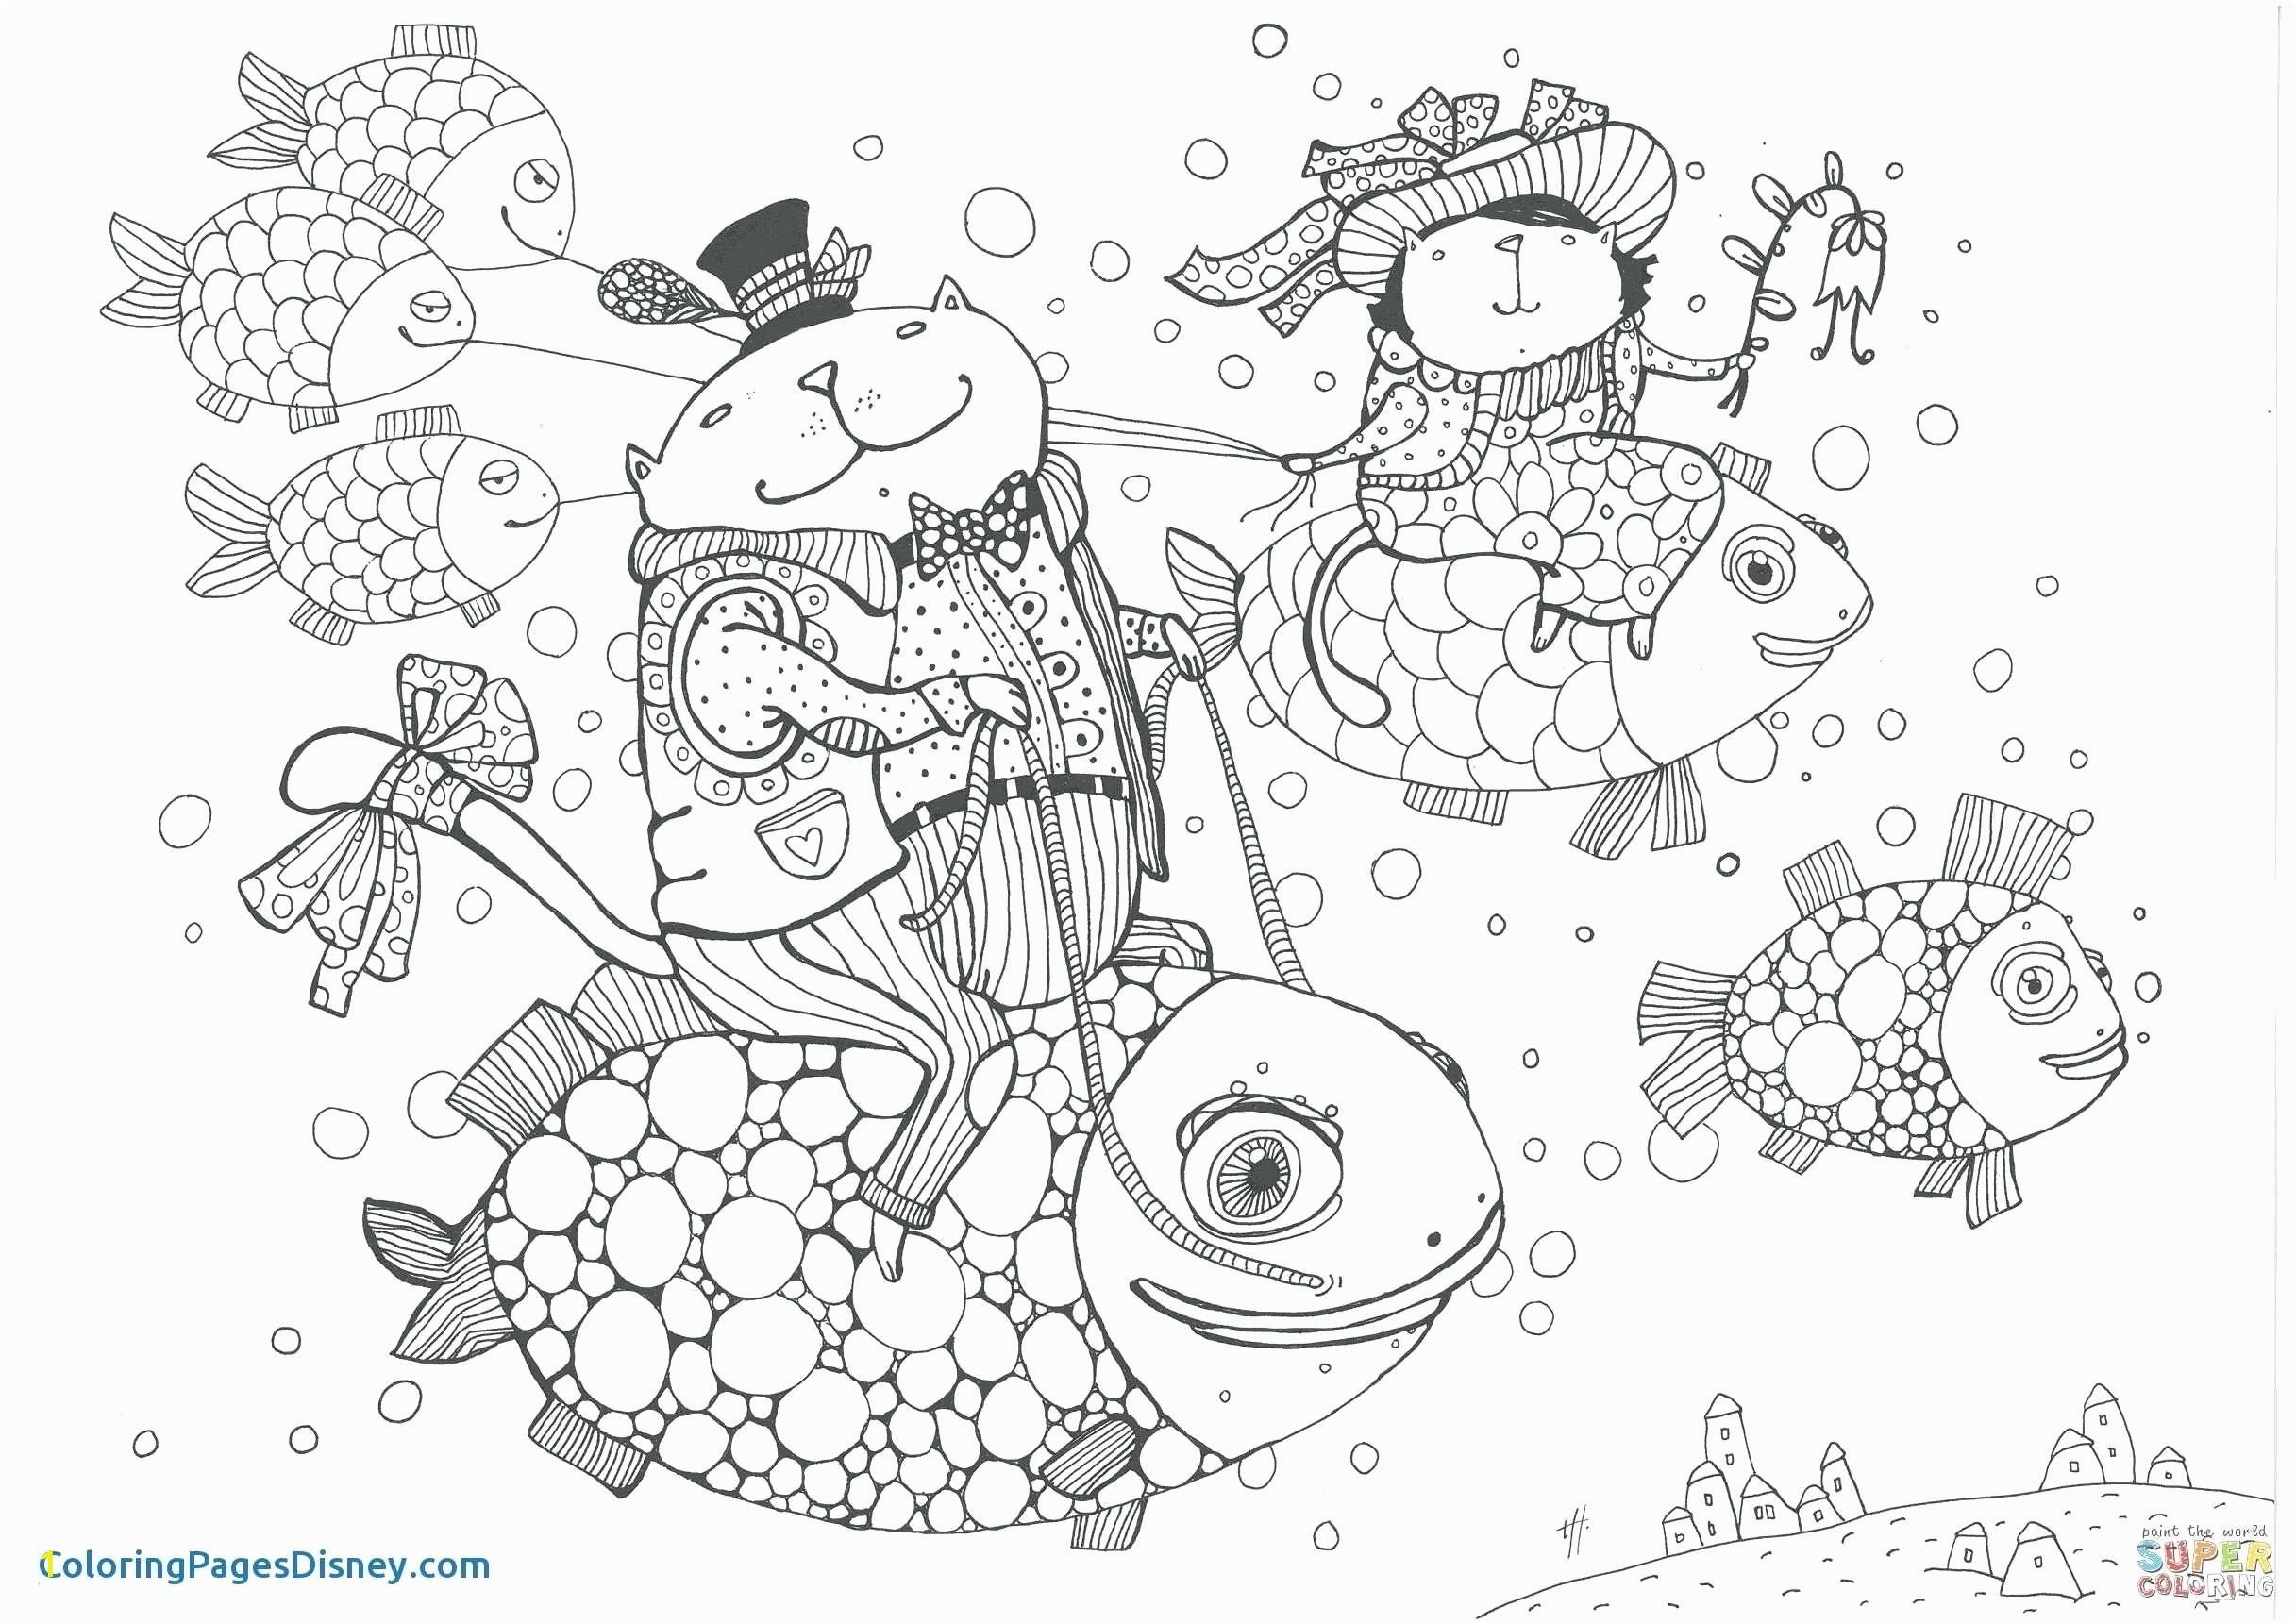 Free Pj Masks Coloring Pages to Print Coloring Book Black and White Christmas ornamenting Sheet